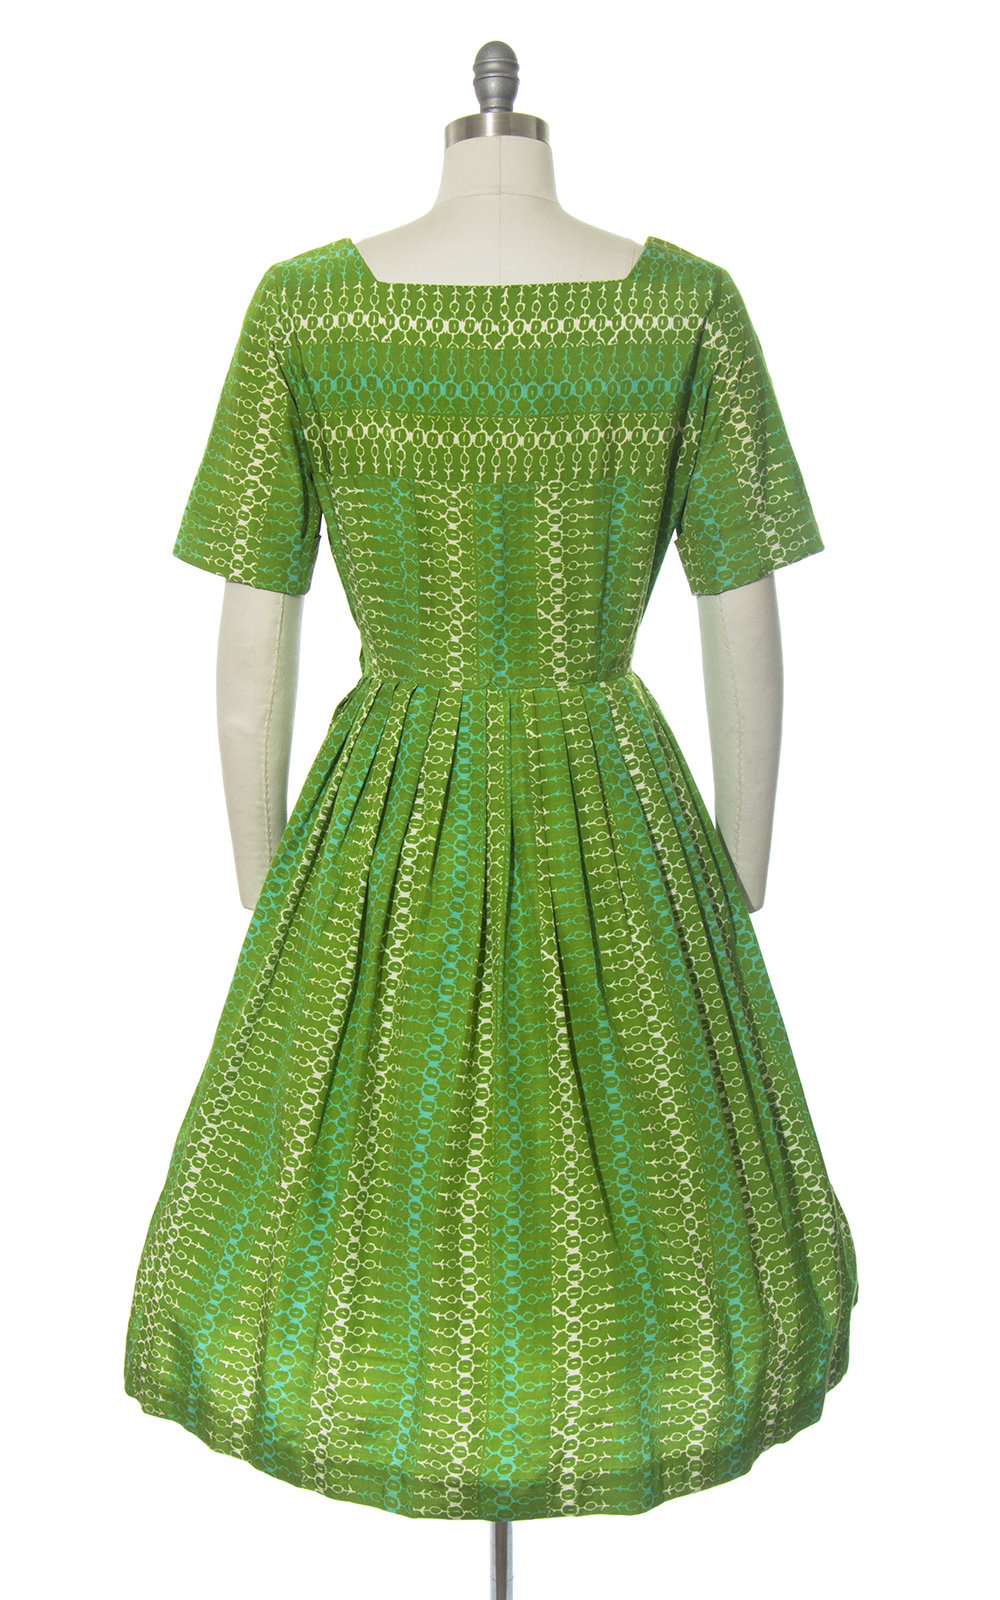 Vintage 1950s | 50s Striped Printed Green Turquoise Rayon Cotton Full Skirt Day Dress (medium)